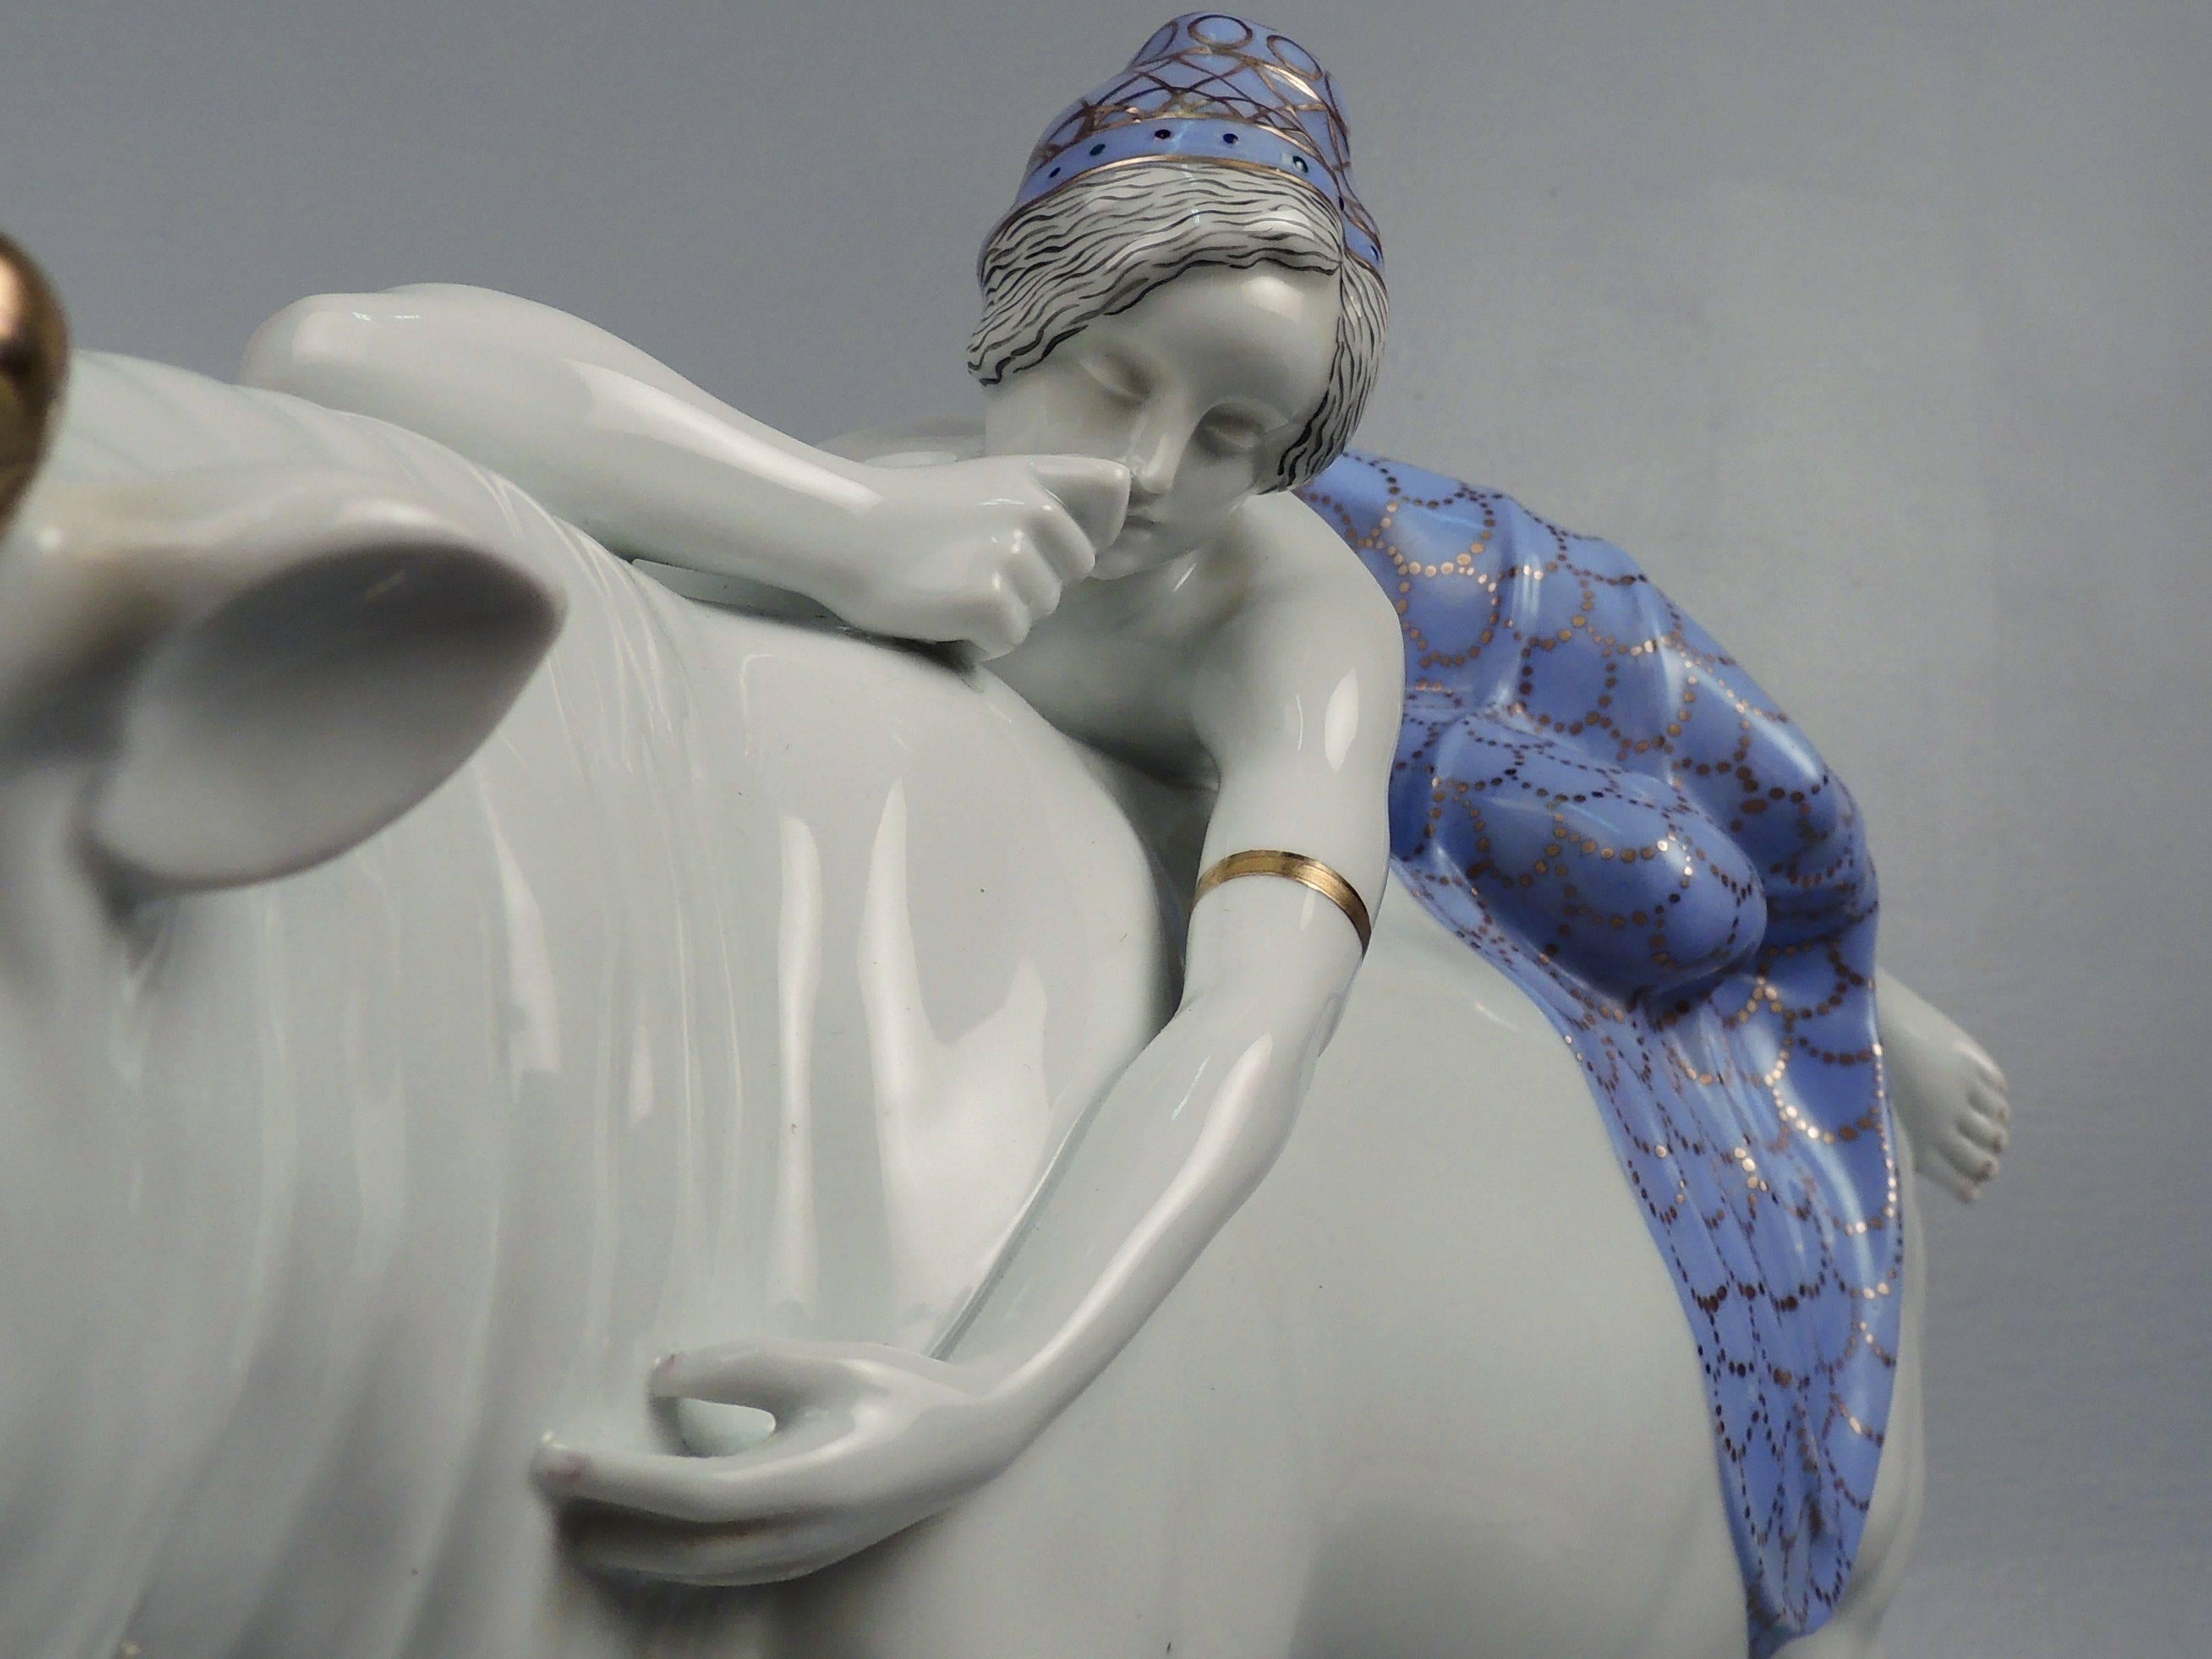 This Art Deco Fraureuth porcelain figurine depicting Europa and the bull was modeled by Carl Nacke in 1919. Nacke's version of the Europa myth clearly falls squarely in the camp of Seduction. This particular figure was cast in the early